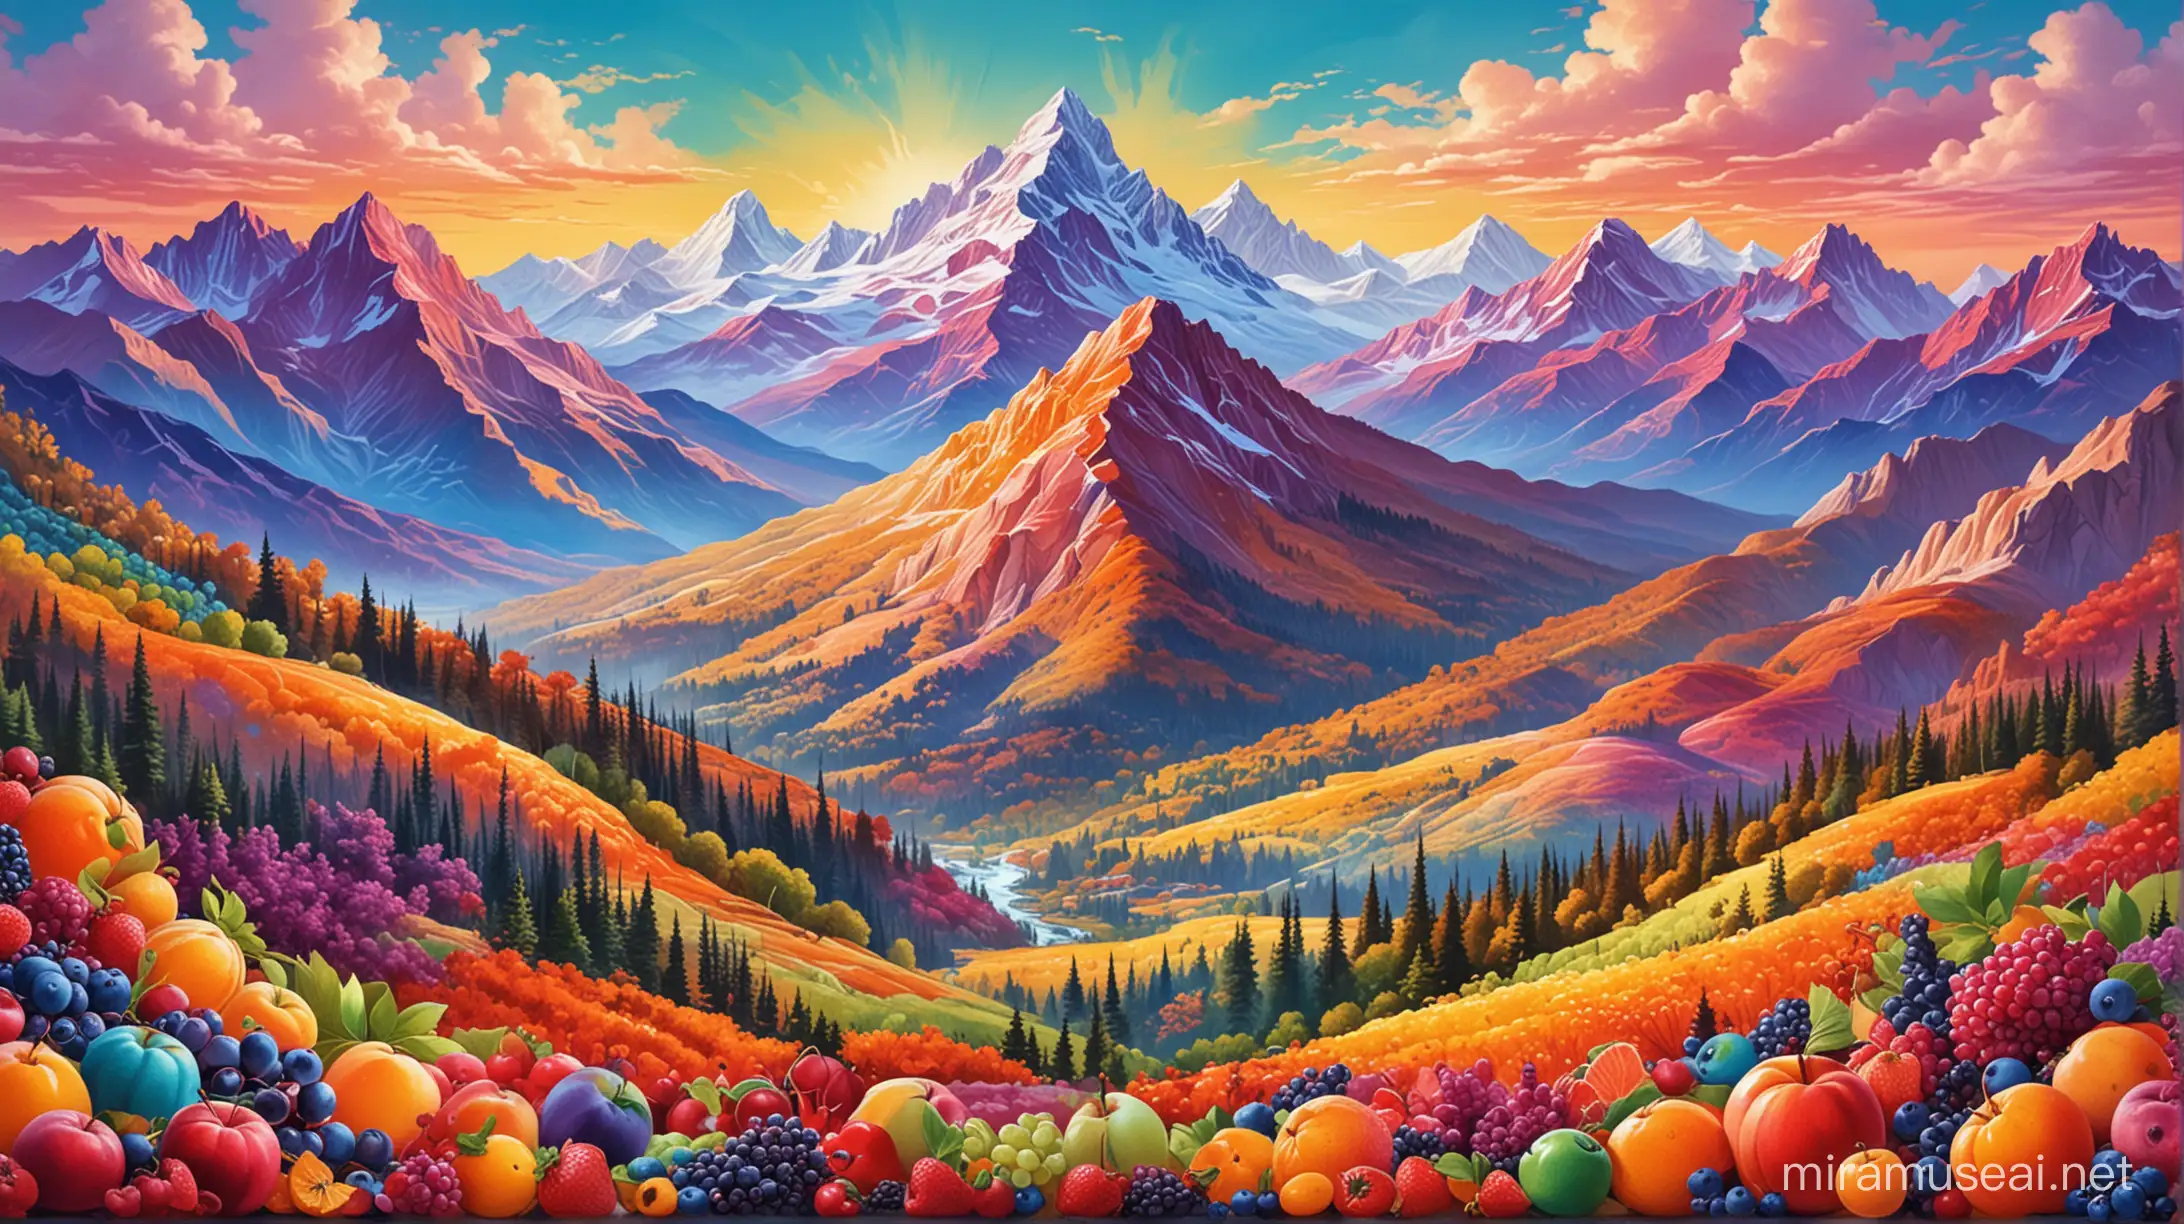 Vibrant Fruit Painting Colorful Fantasy Mountains with Delightful Treats